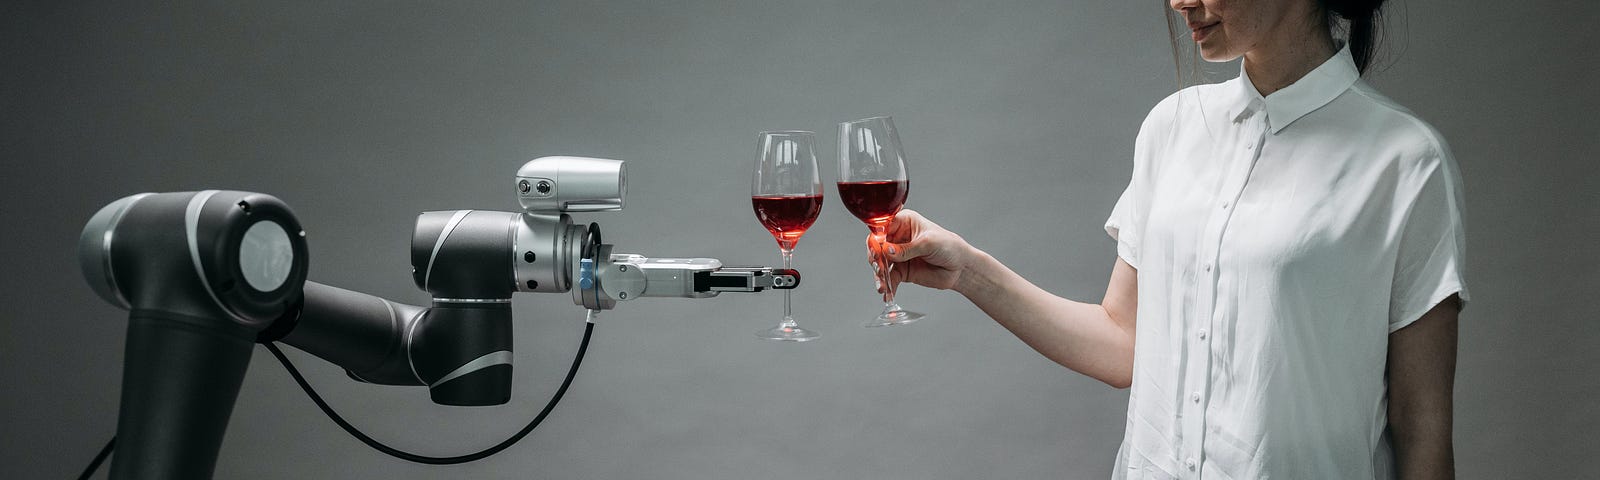 a robot holding a glass of wine and clinking it against the glass of wine a woman is holding. She is smiling slightly.